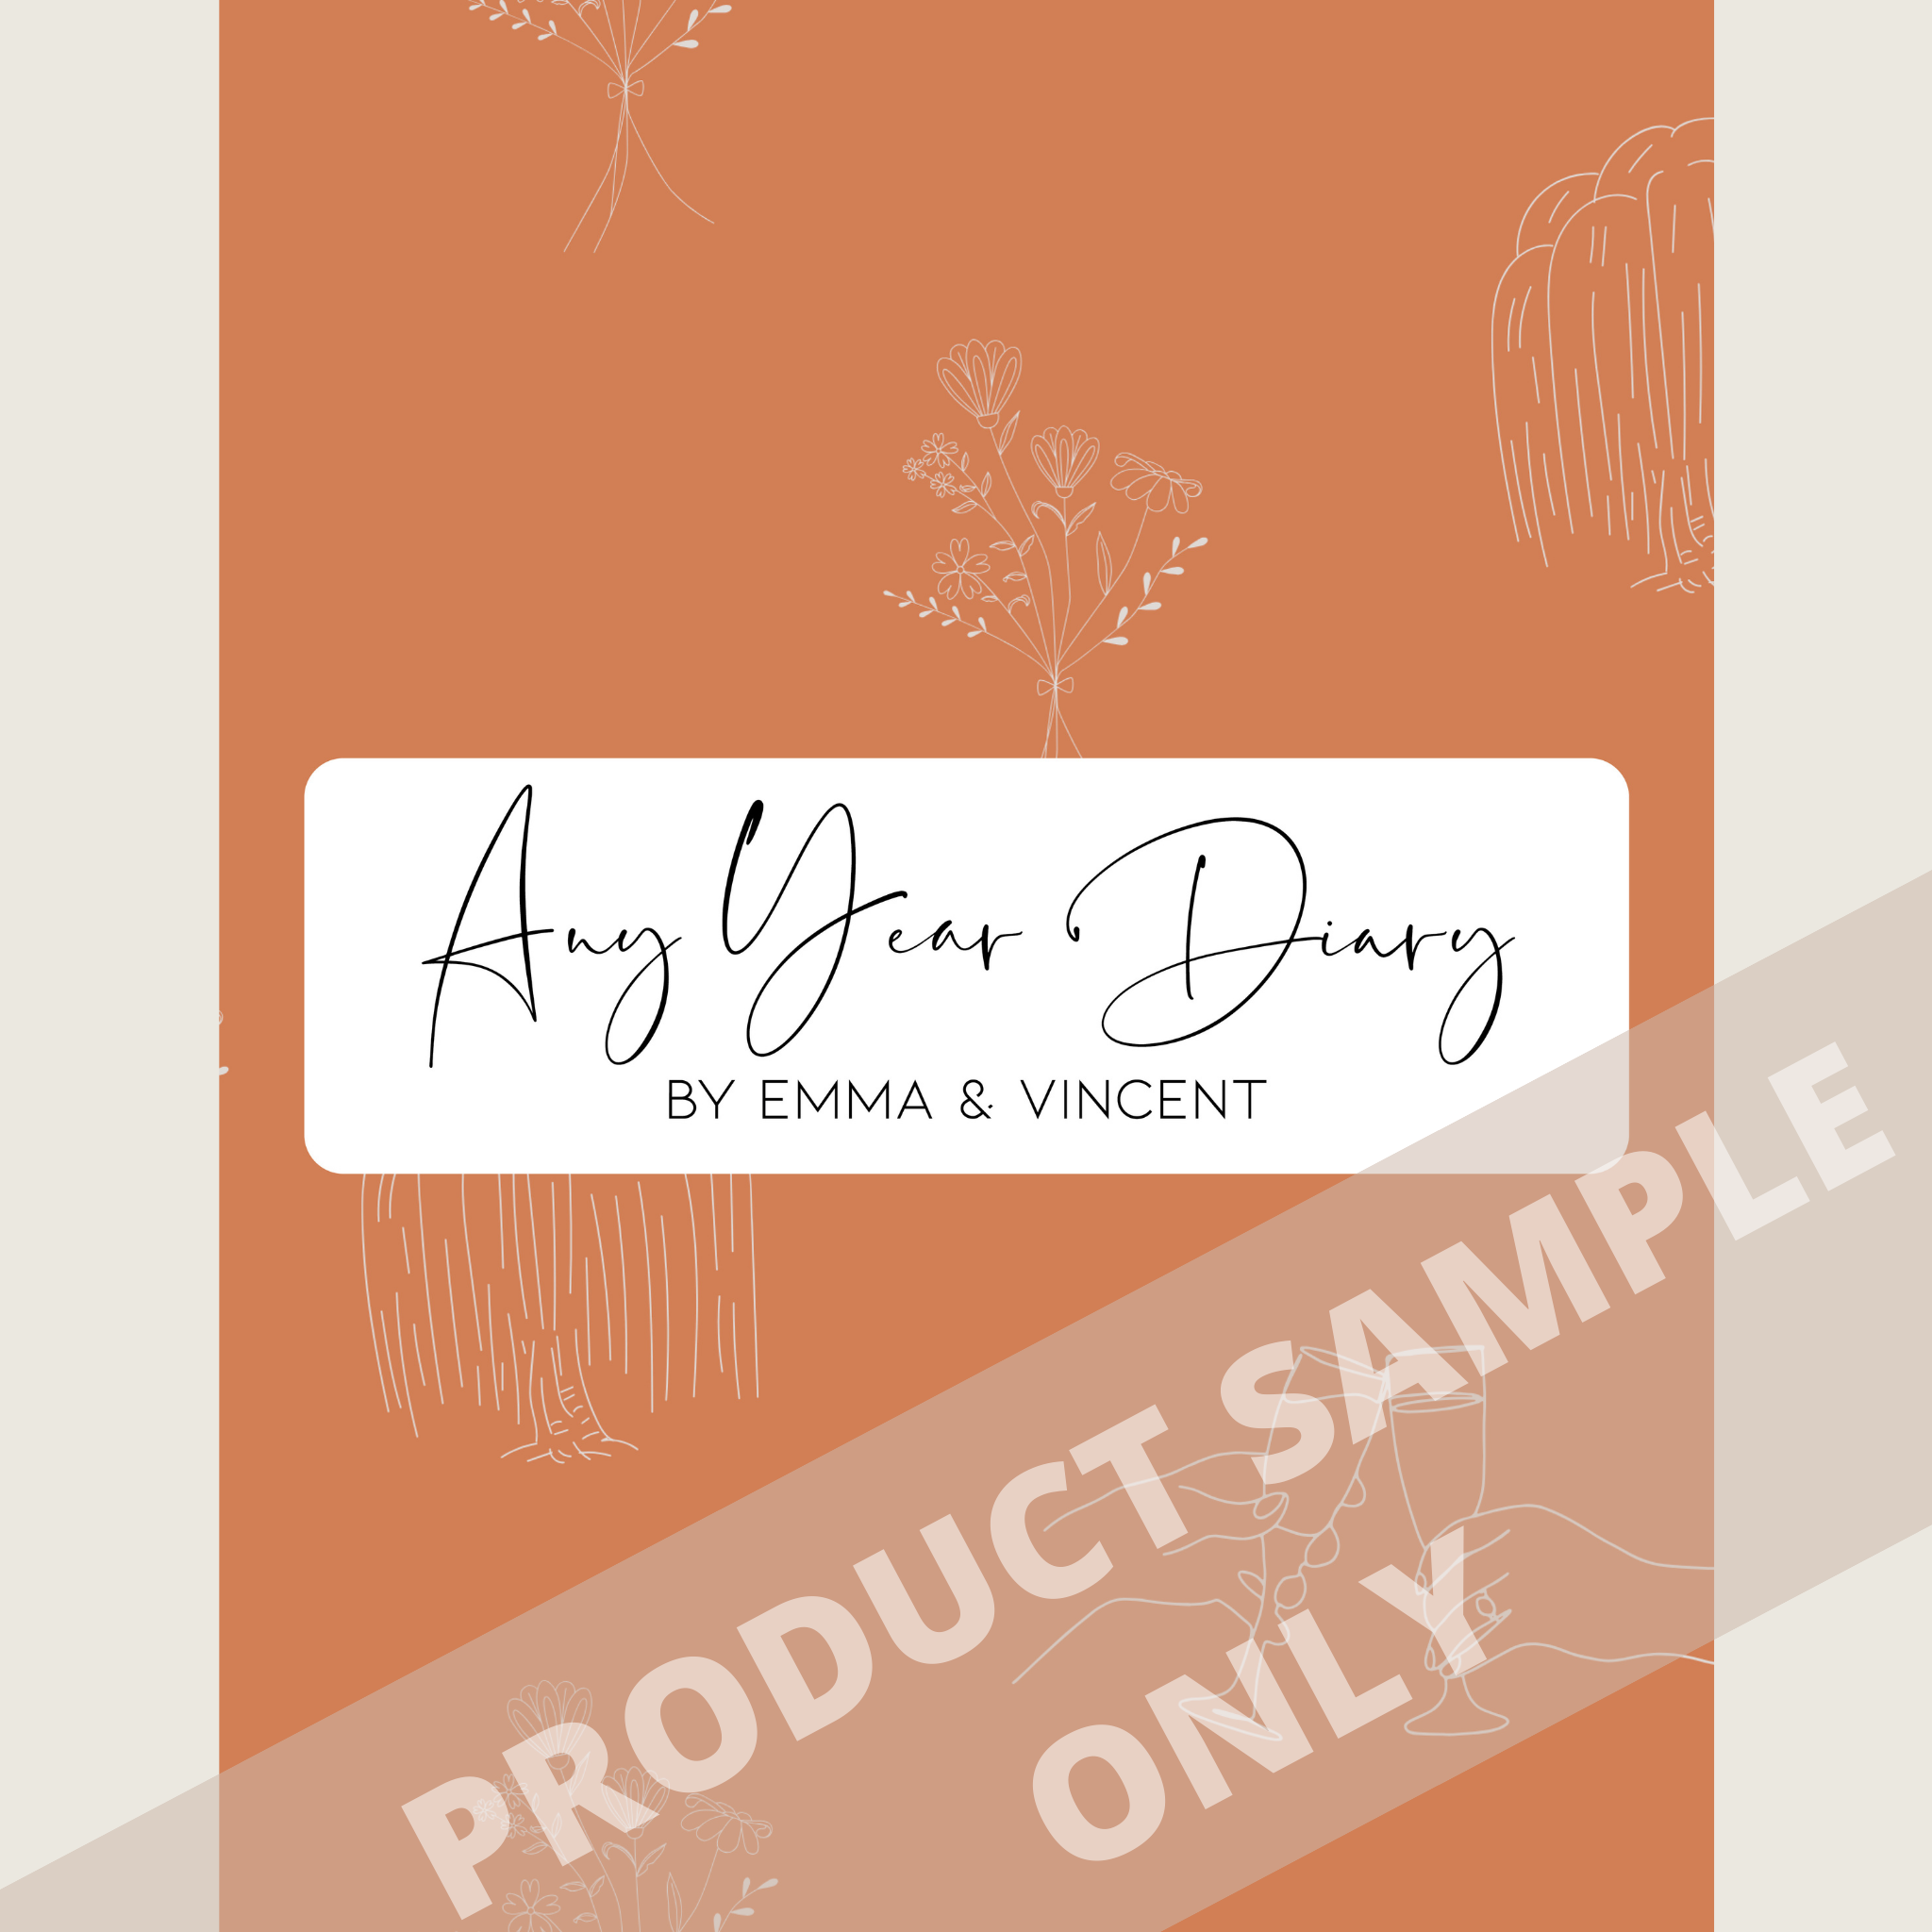 DIGITAL ANY YEAR DIARY (Evermore Print - The Eras Tour)